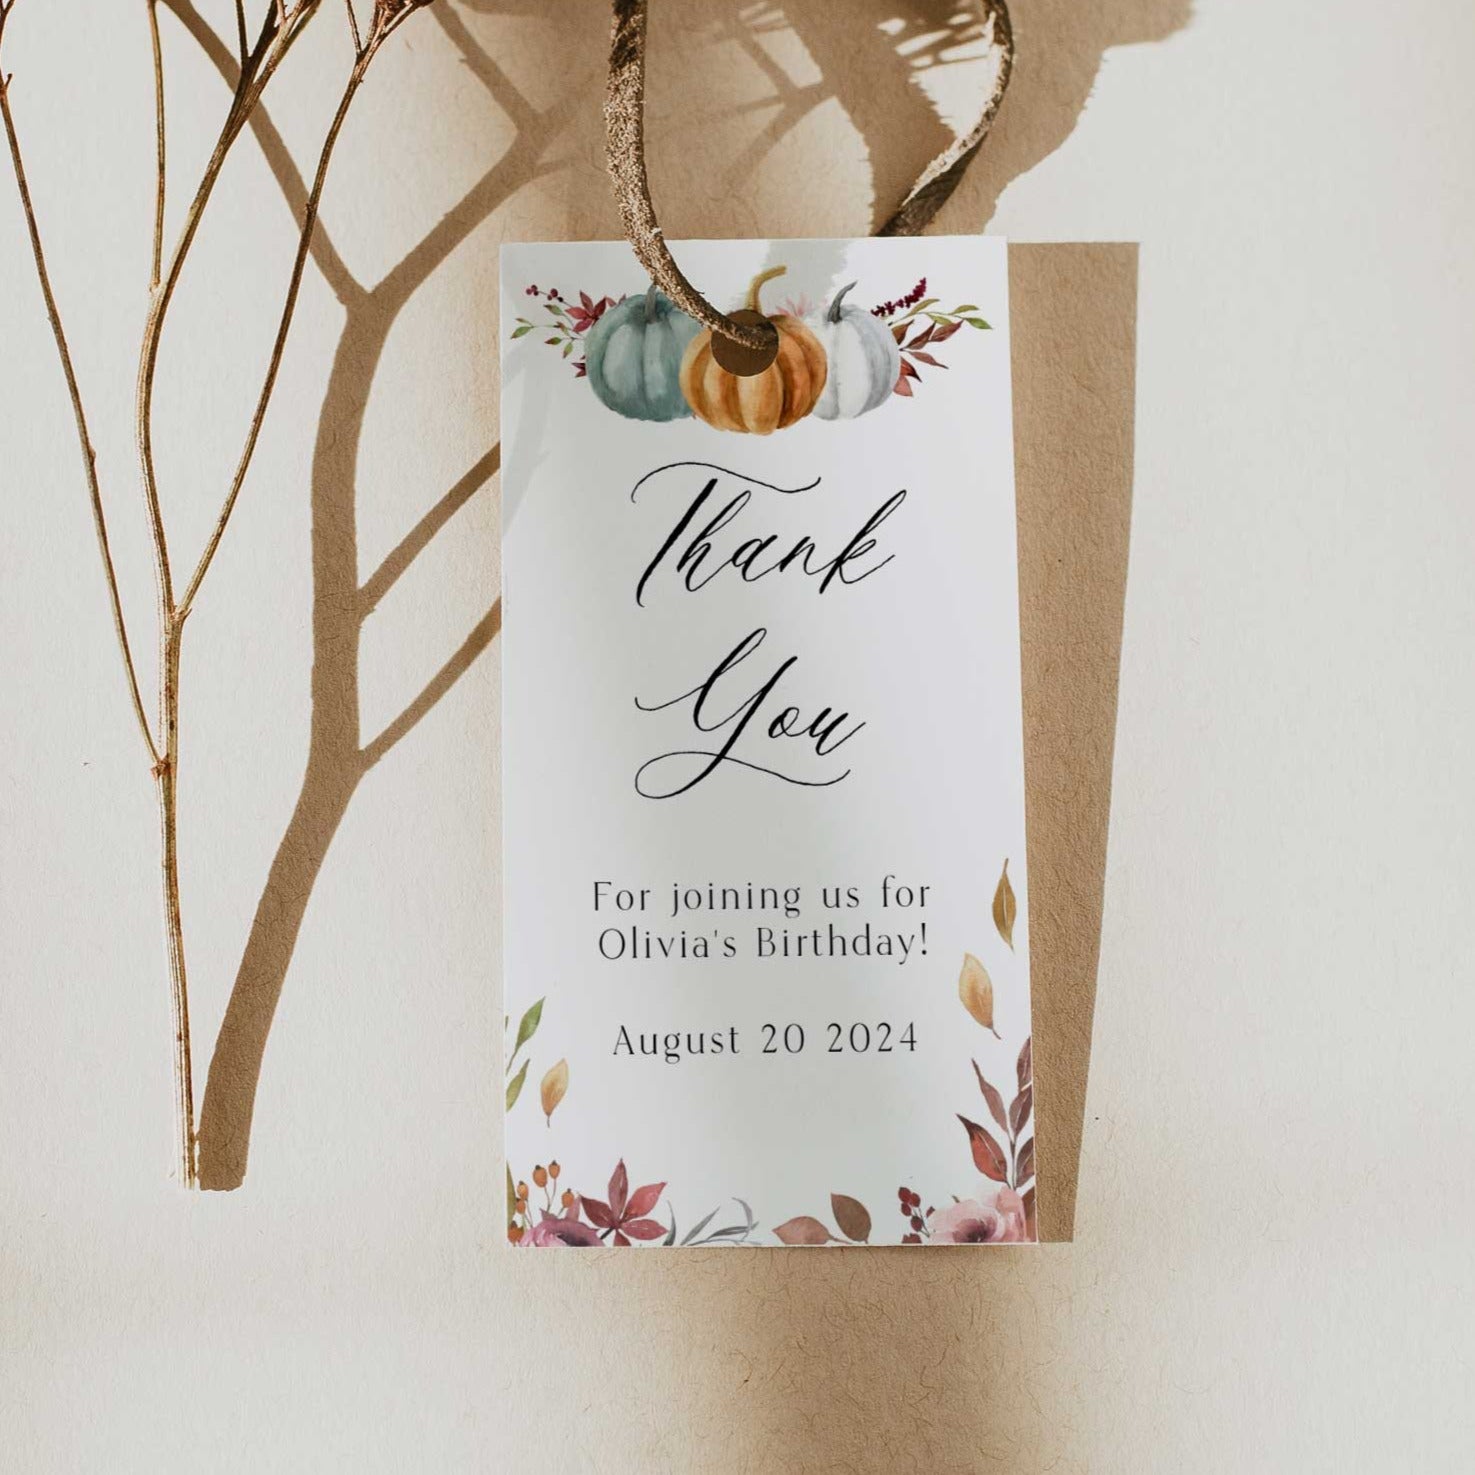 Fully editable and printable baby shower thank you tags with a fall pumpkin design. Perfect for a Fall Pumpkin baby shower themed party